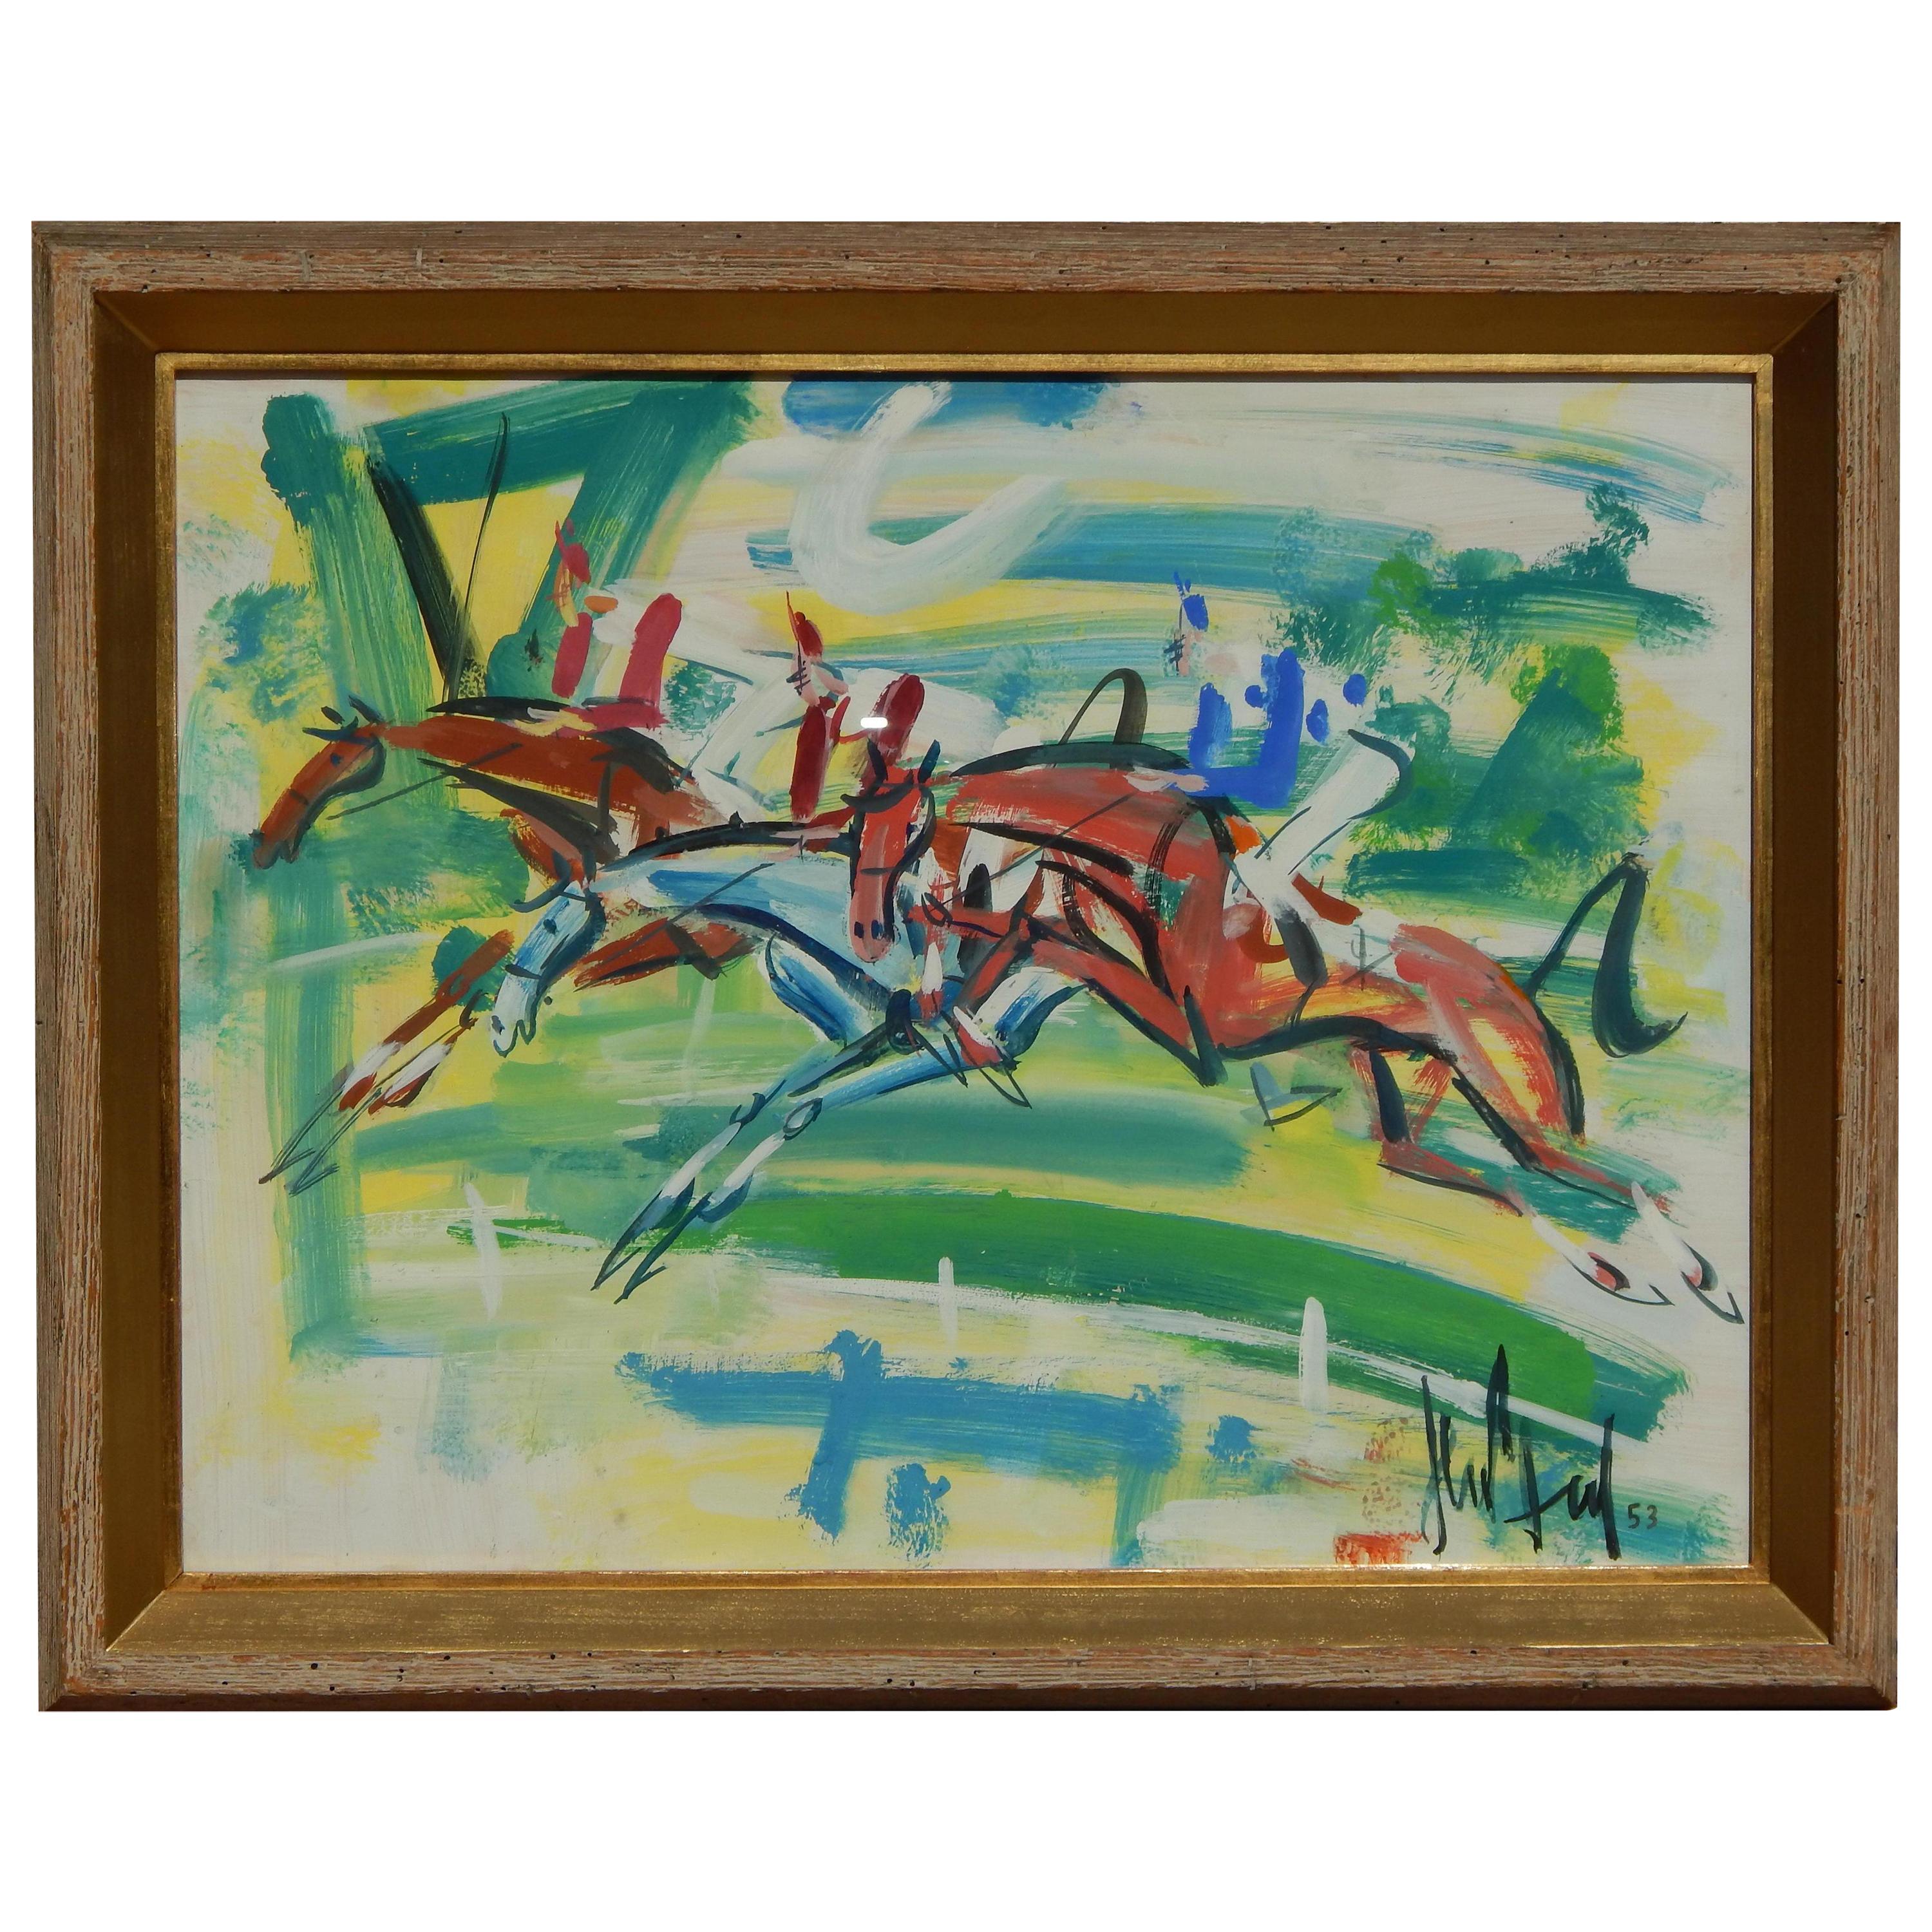 Gen Paul French Expressionist Gouache 1953, "Steeplechase"